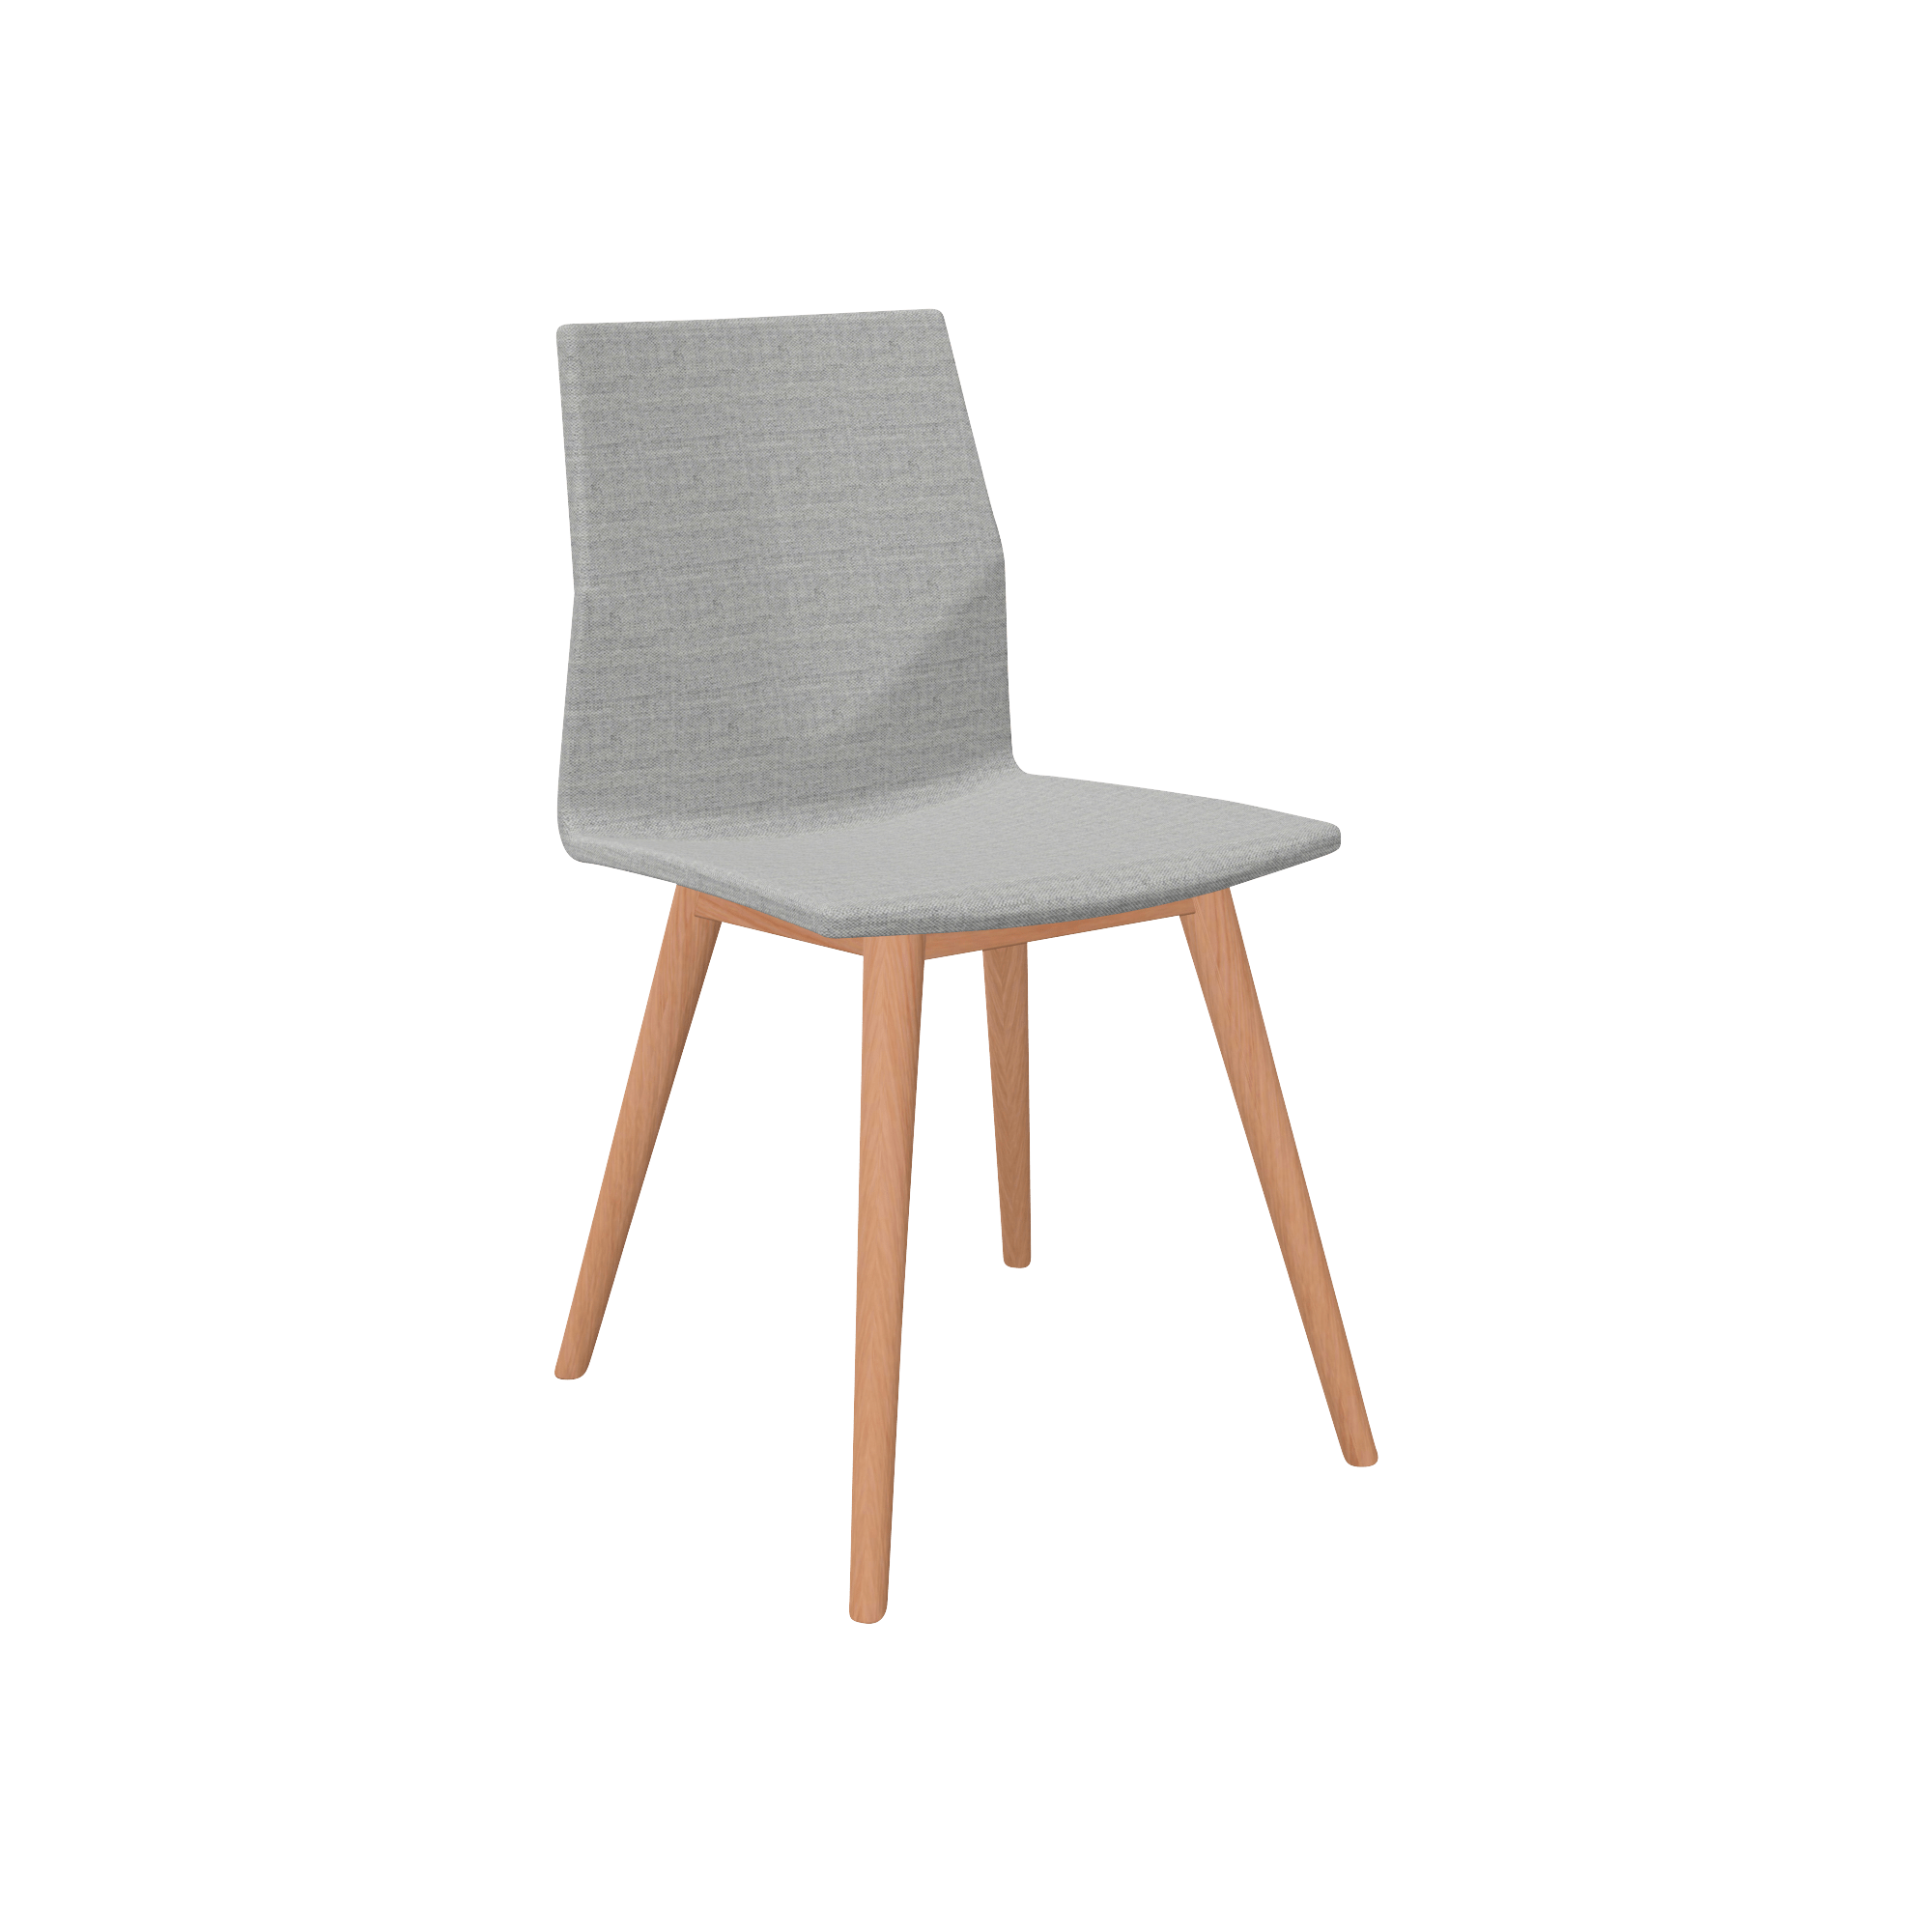 grey chair with wooden legs